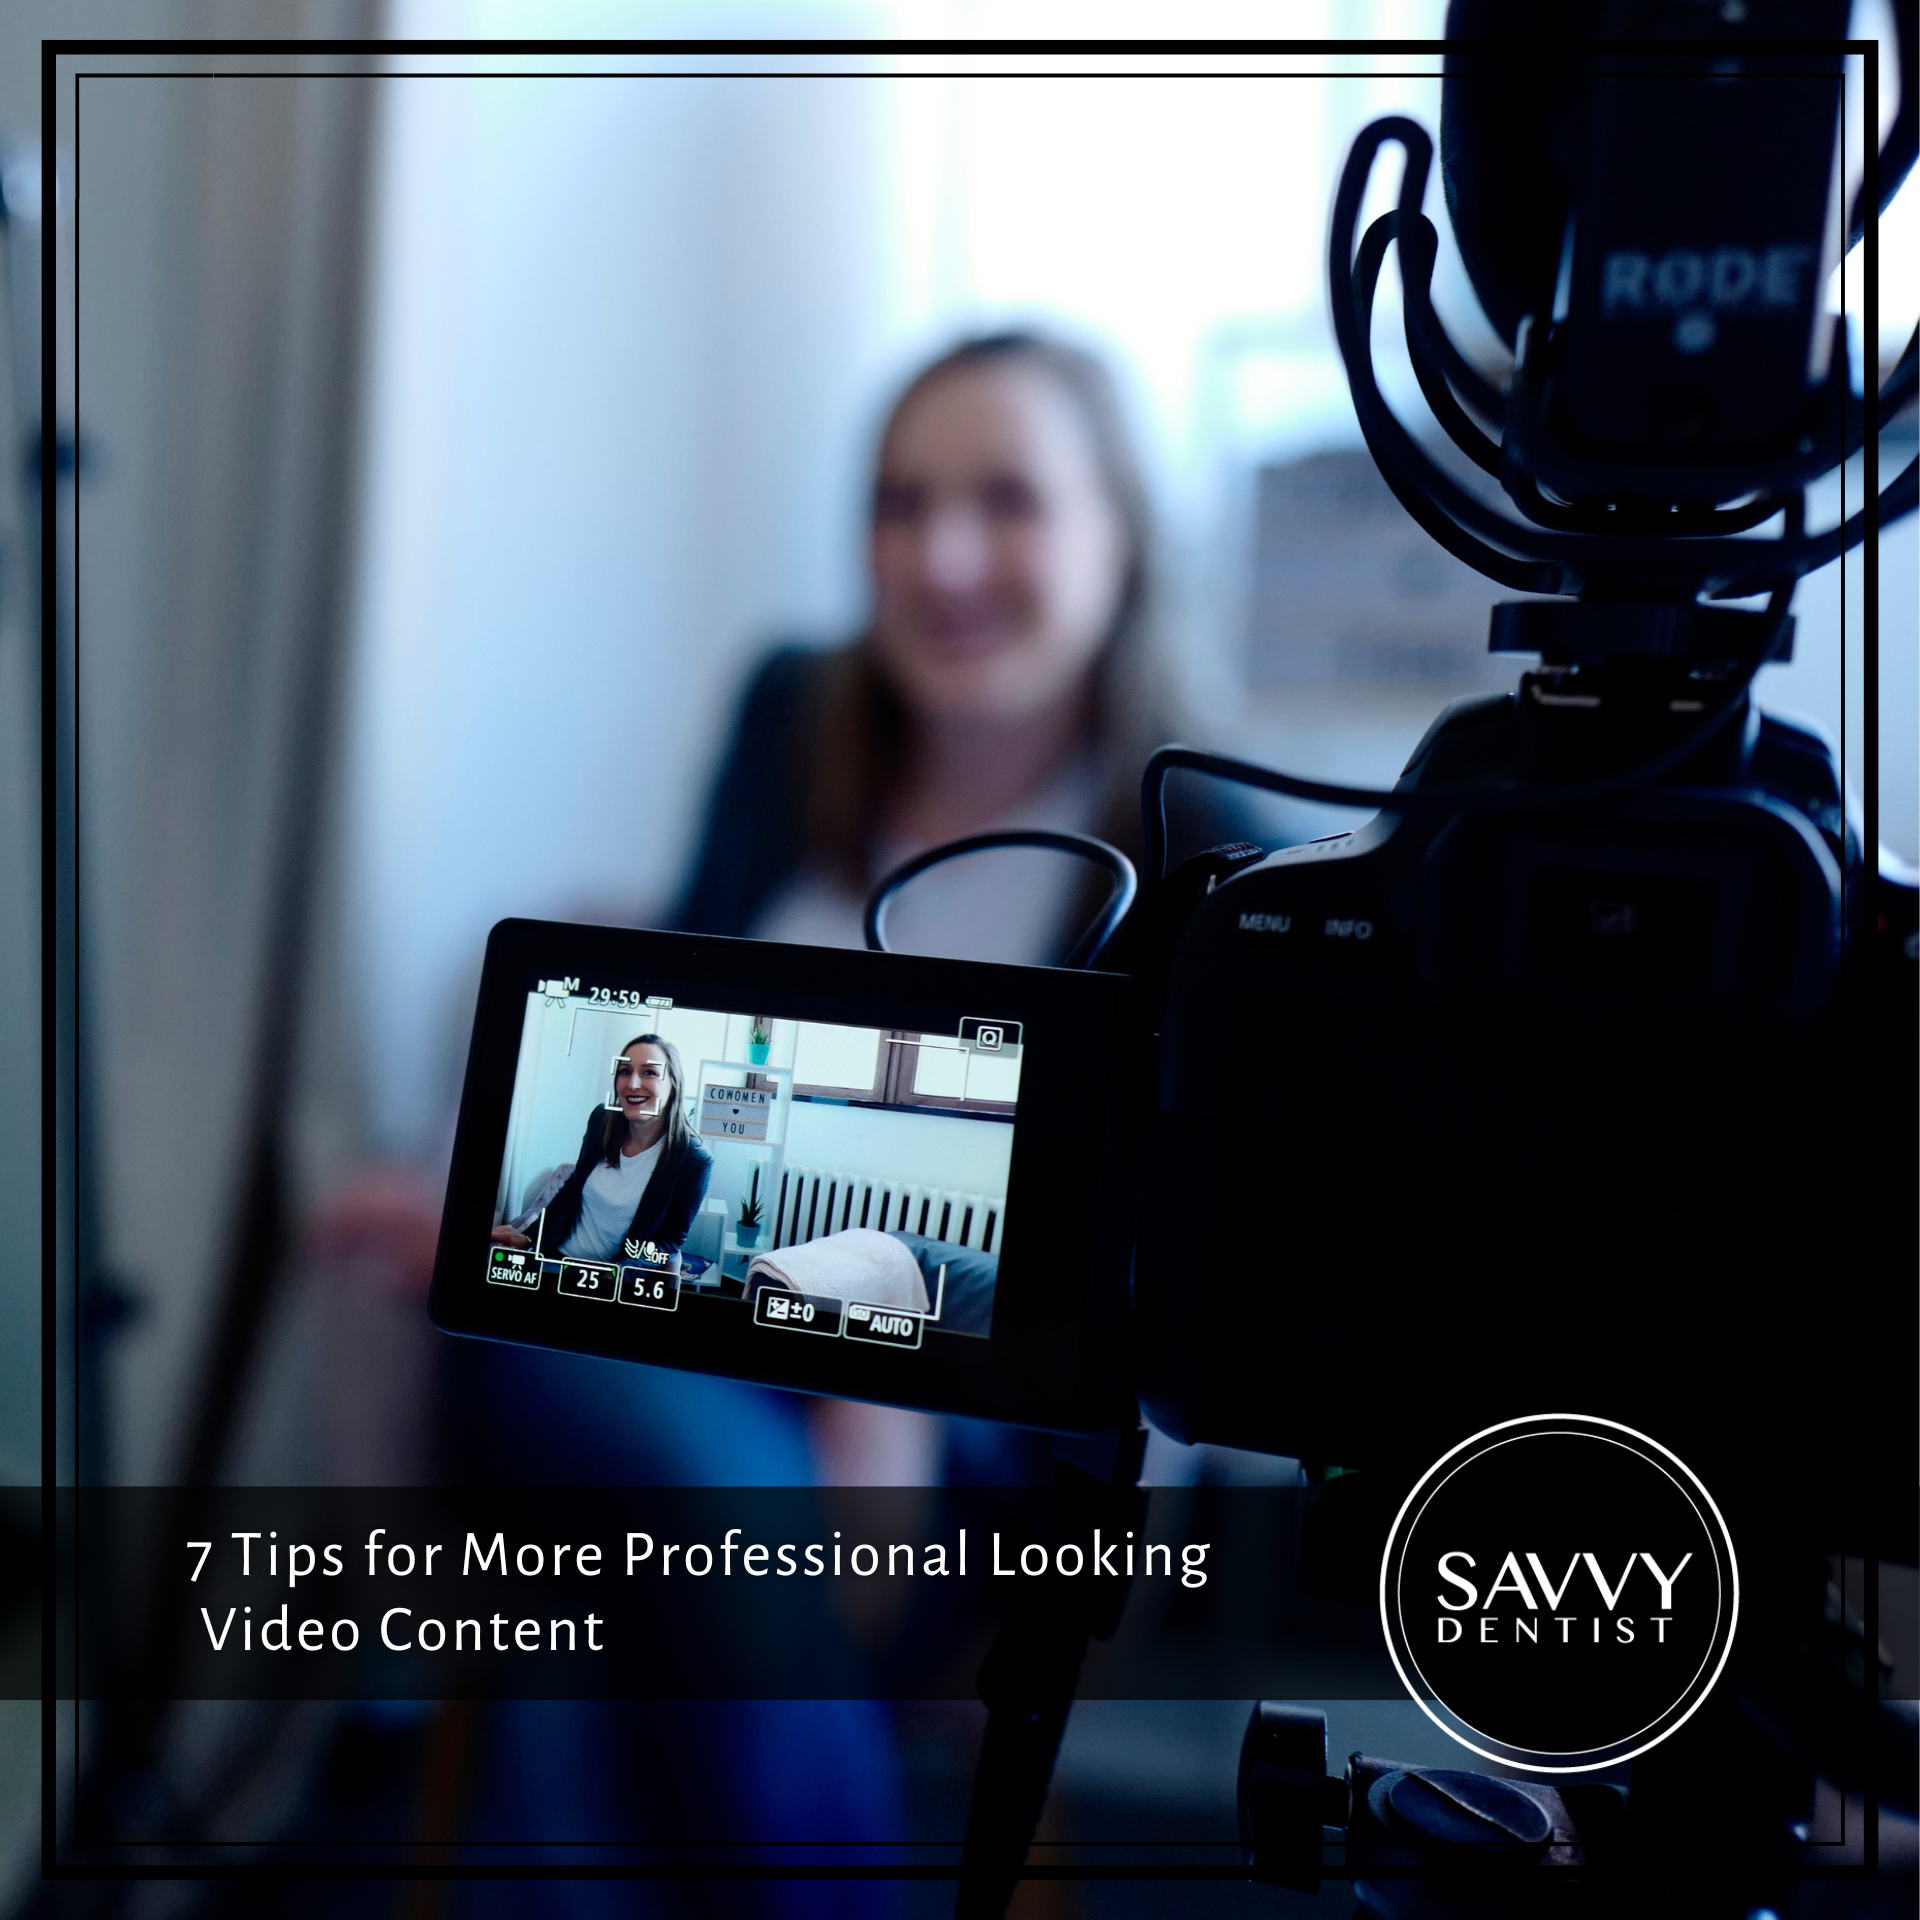 7 Tips for More Professional Looking Video Content